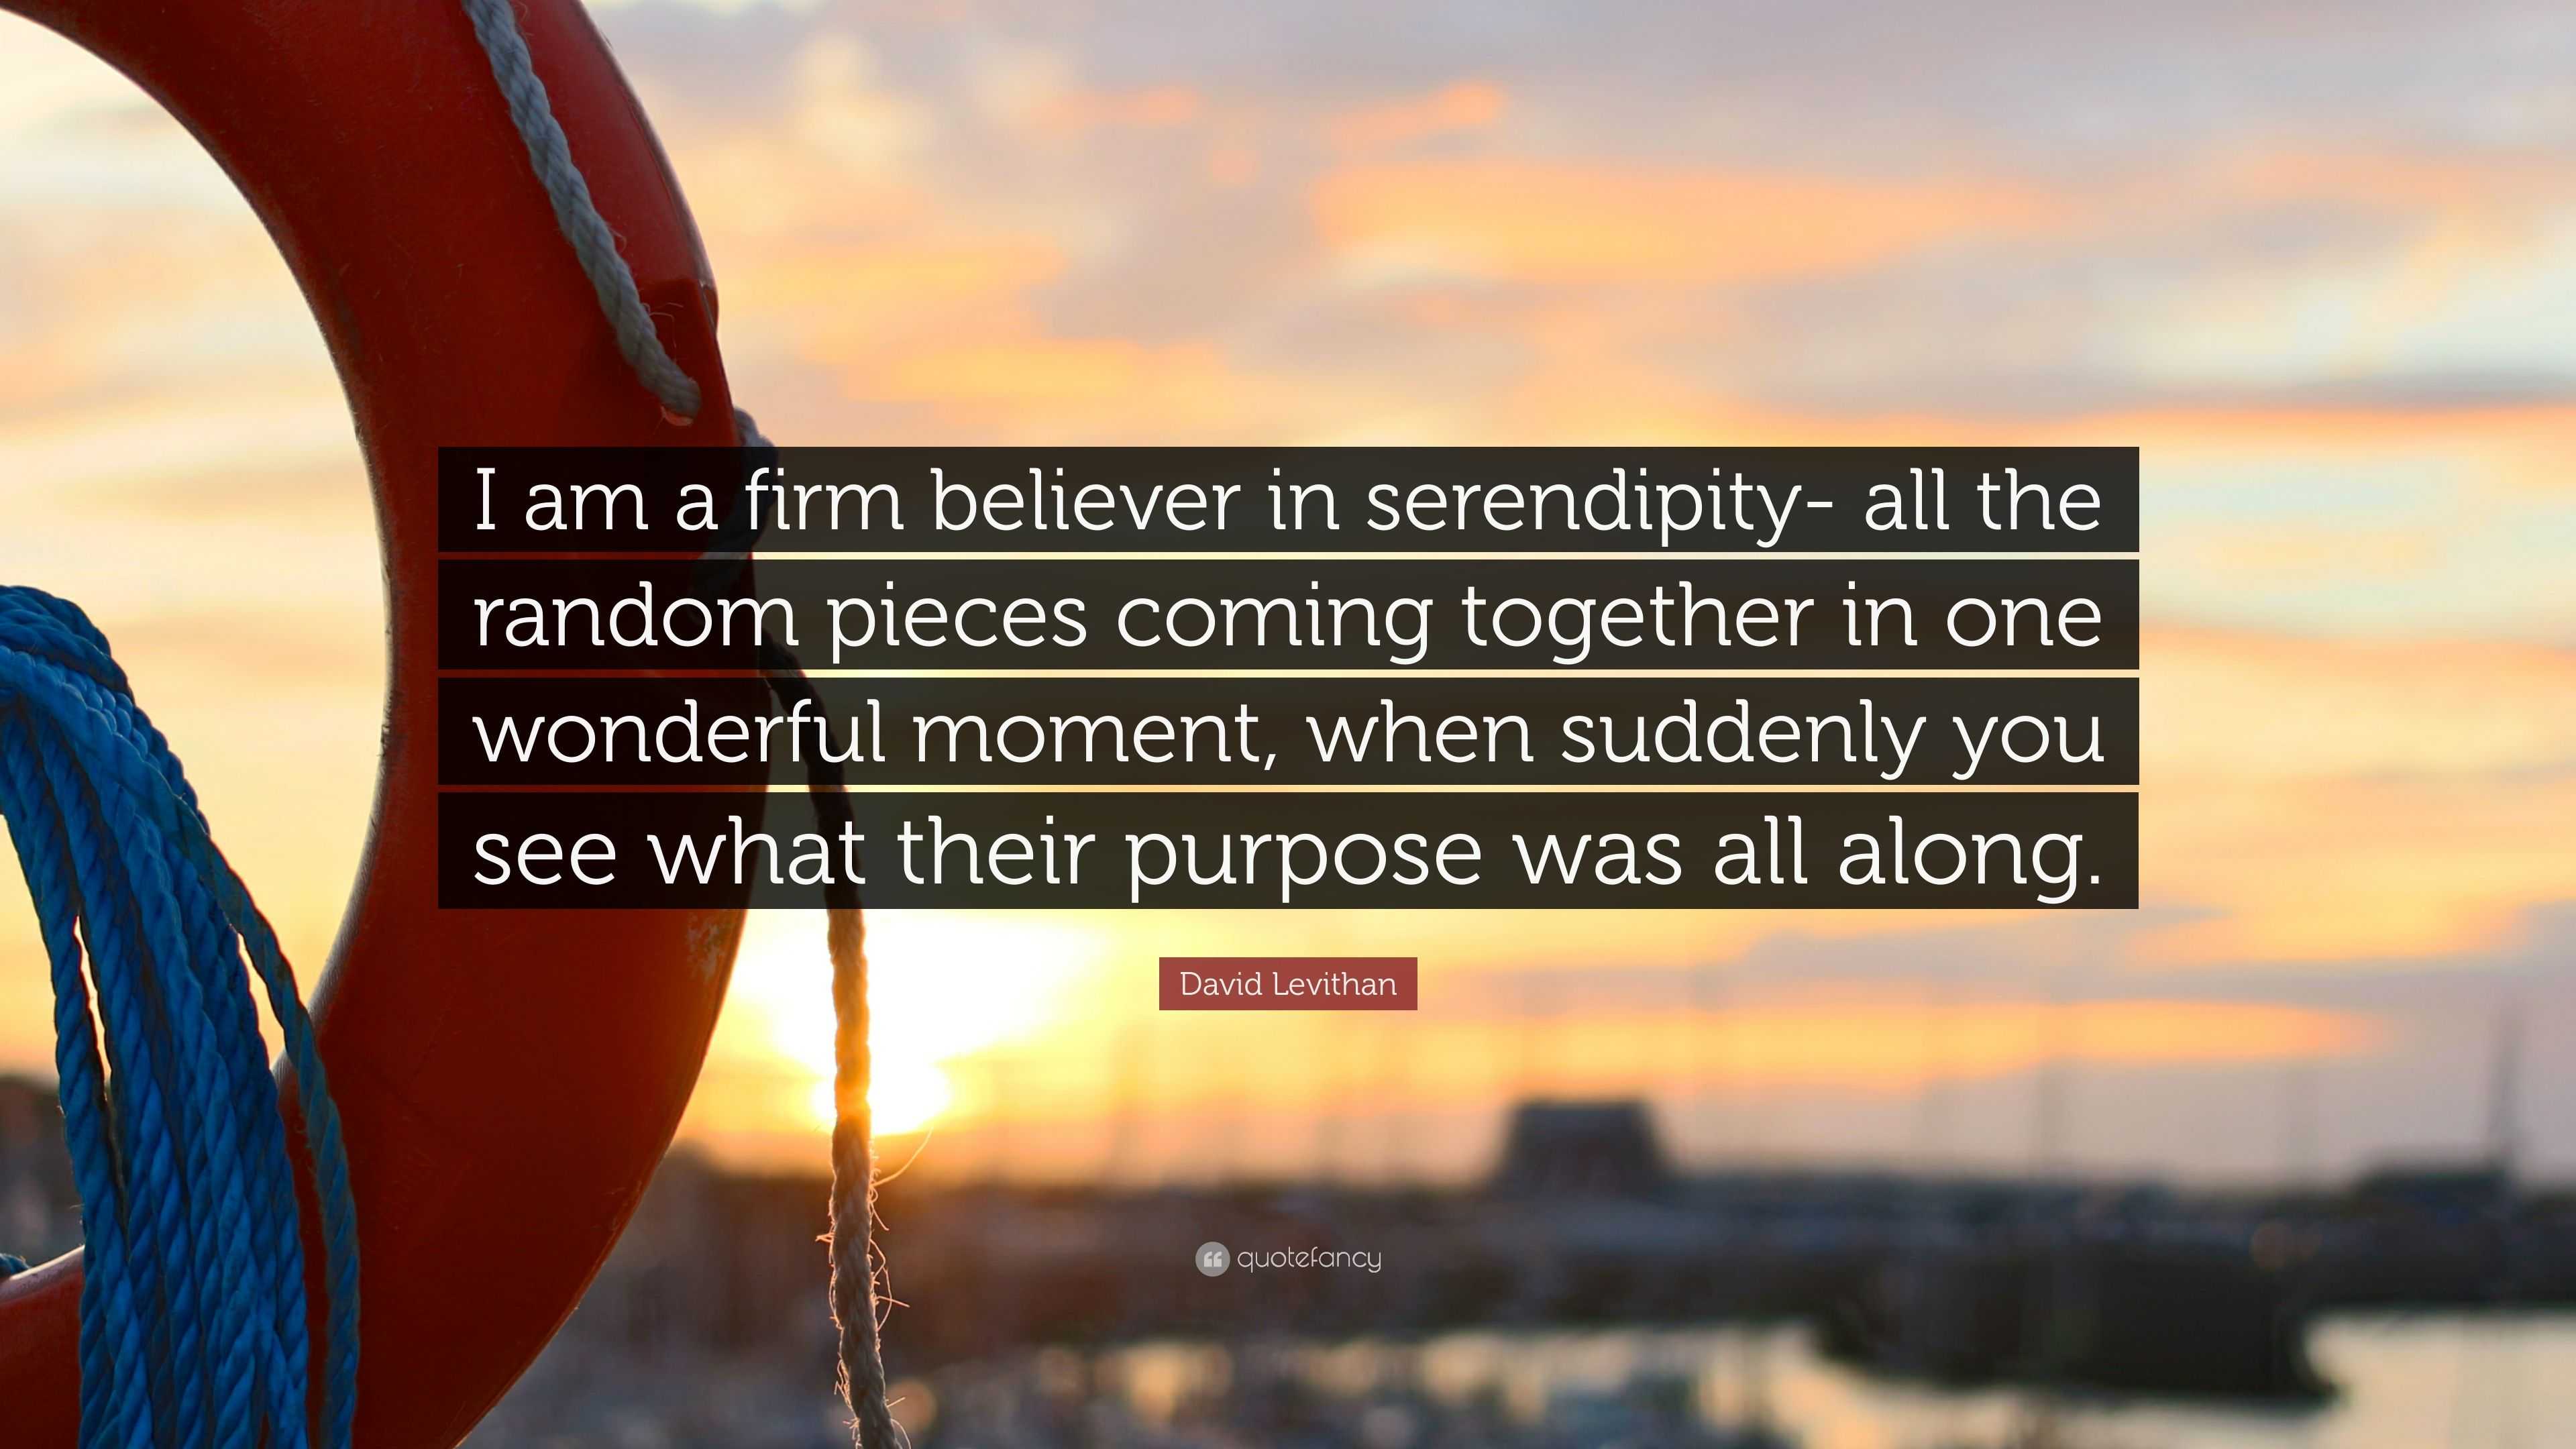 David Levithan Quote: “I am a firm believer in serendipity- all